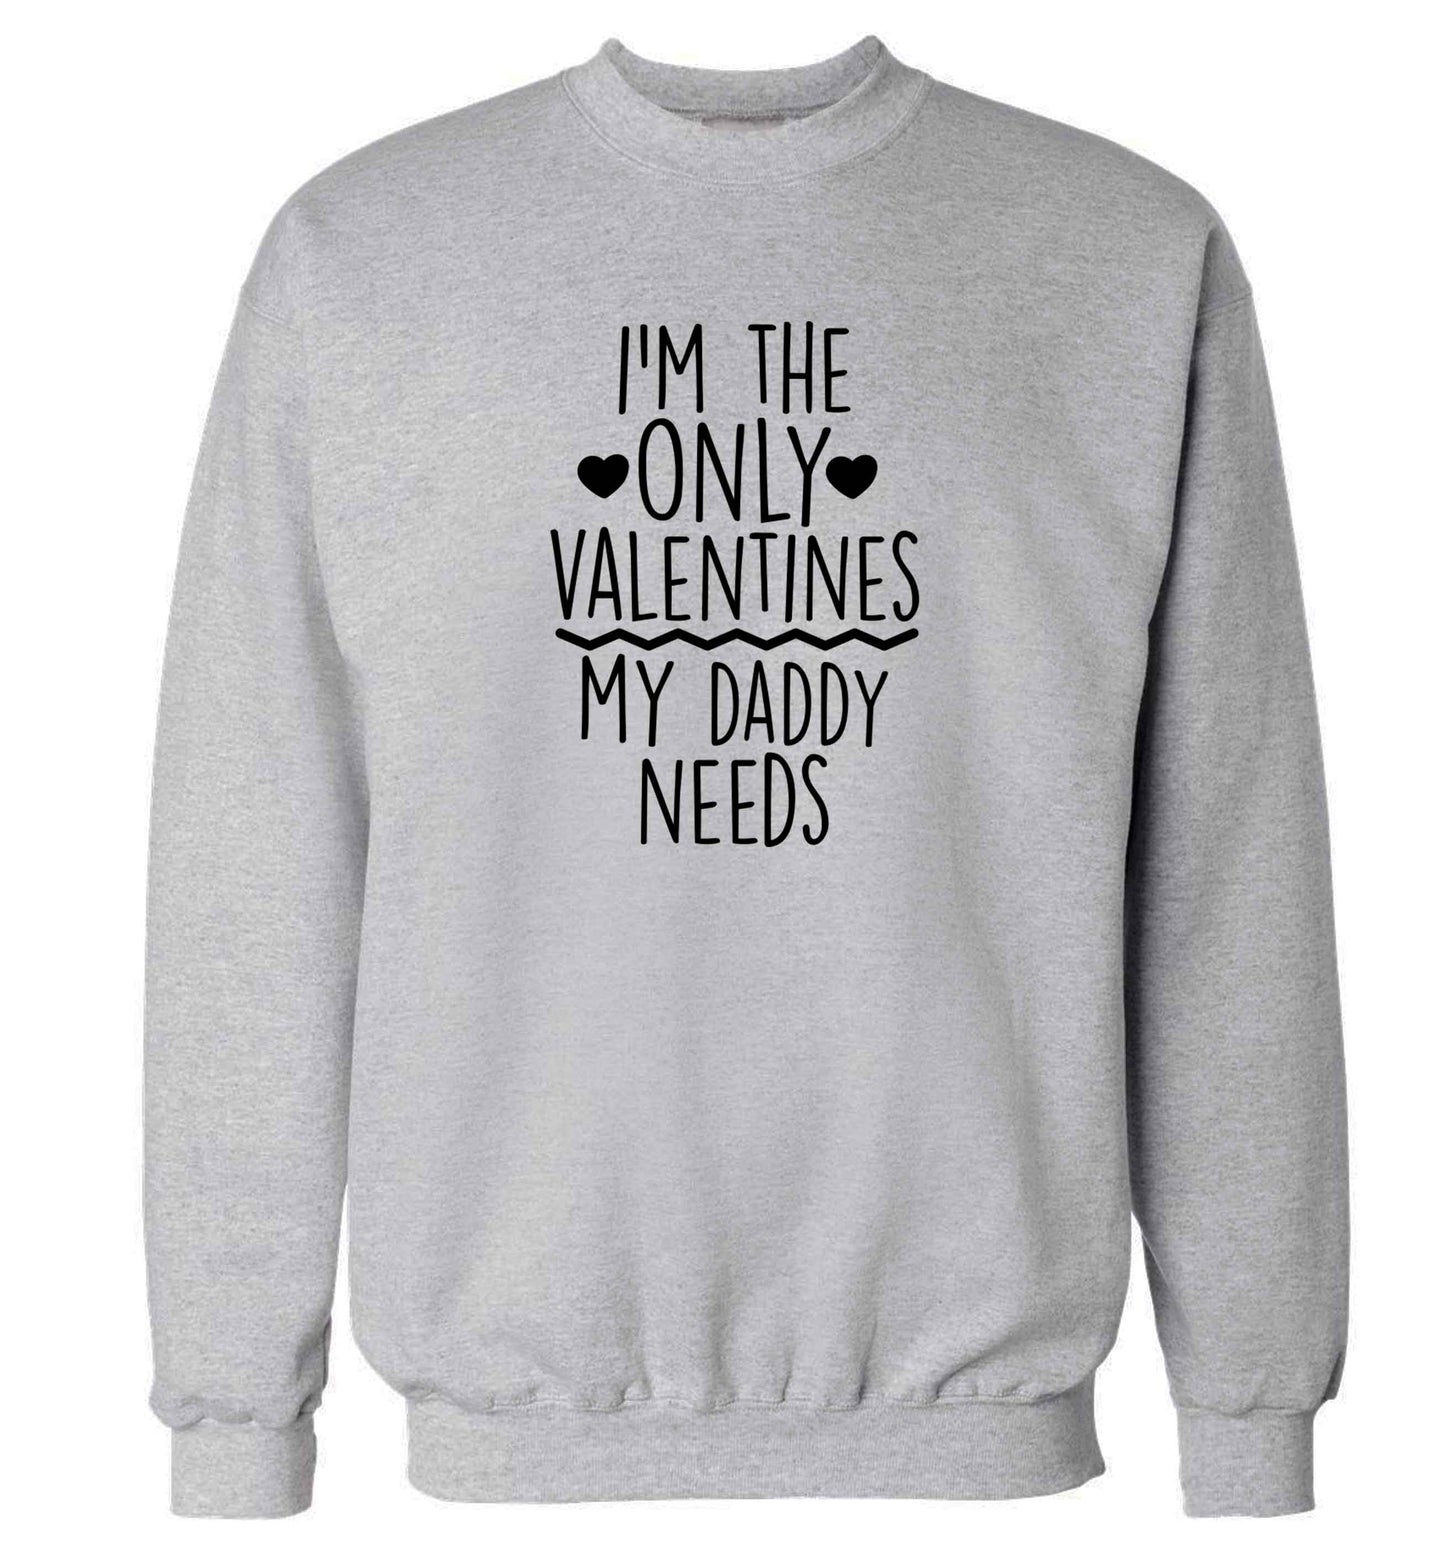 I'm the only valentines my daddy needs adult's unisex grey sweater 2XL